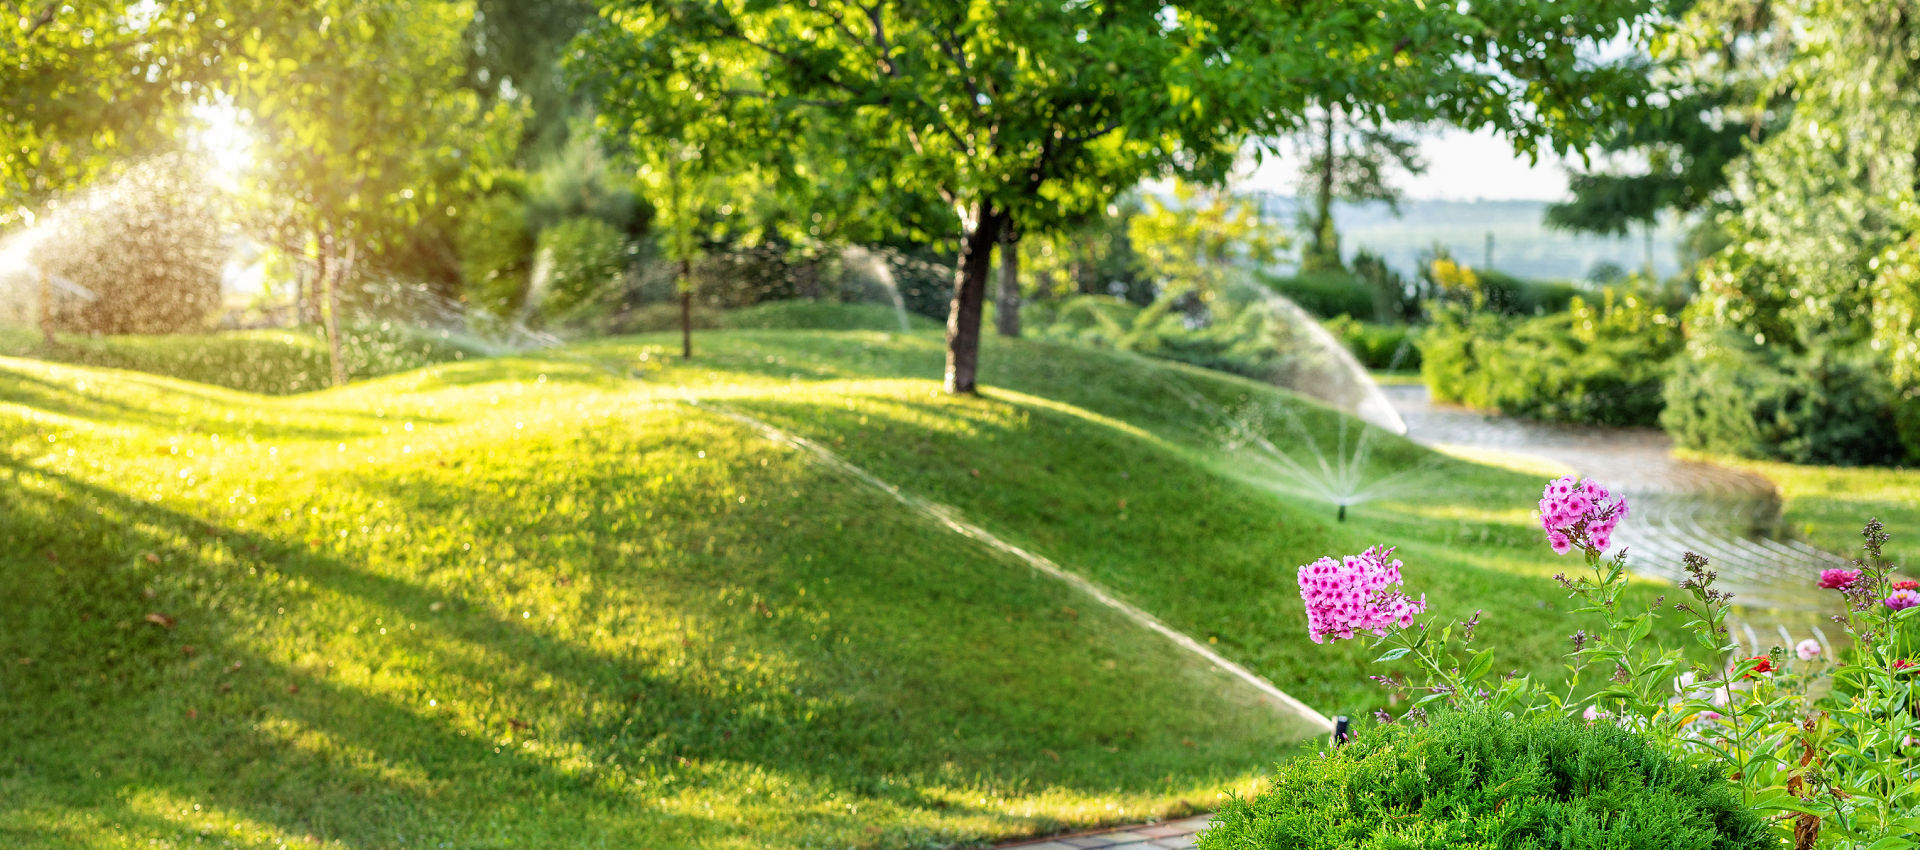 Lawn Irrigation: Are You Guilty of These 4 Mistakes? Cumming, GA